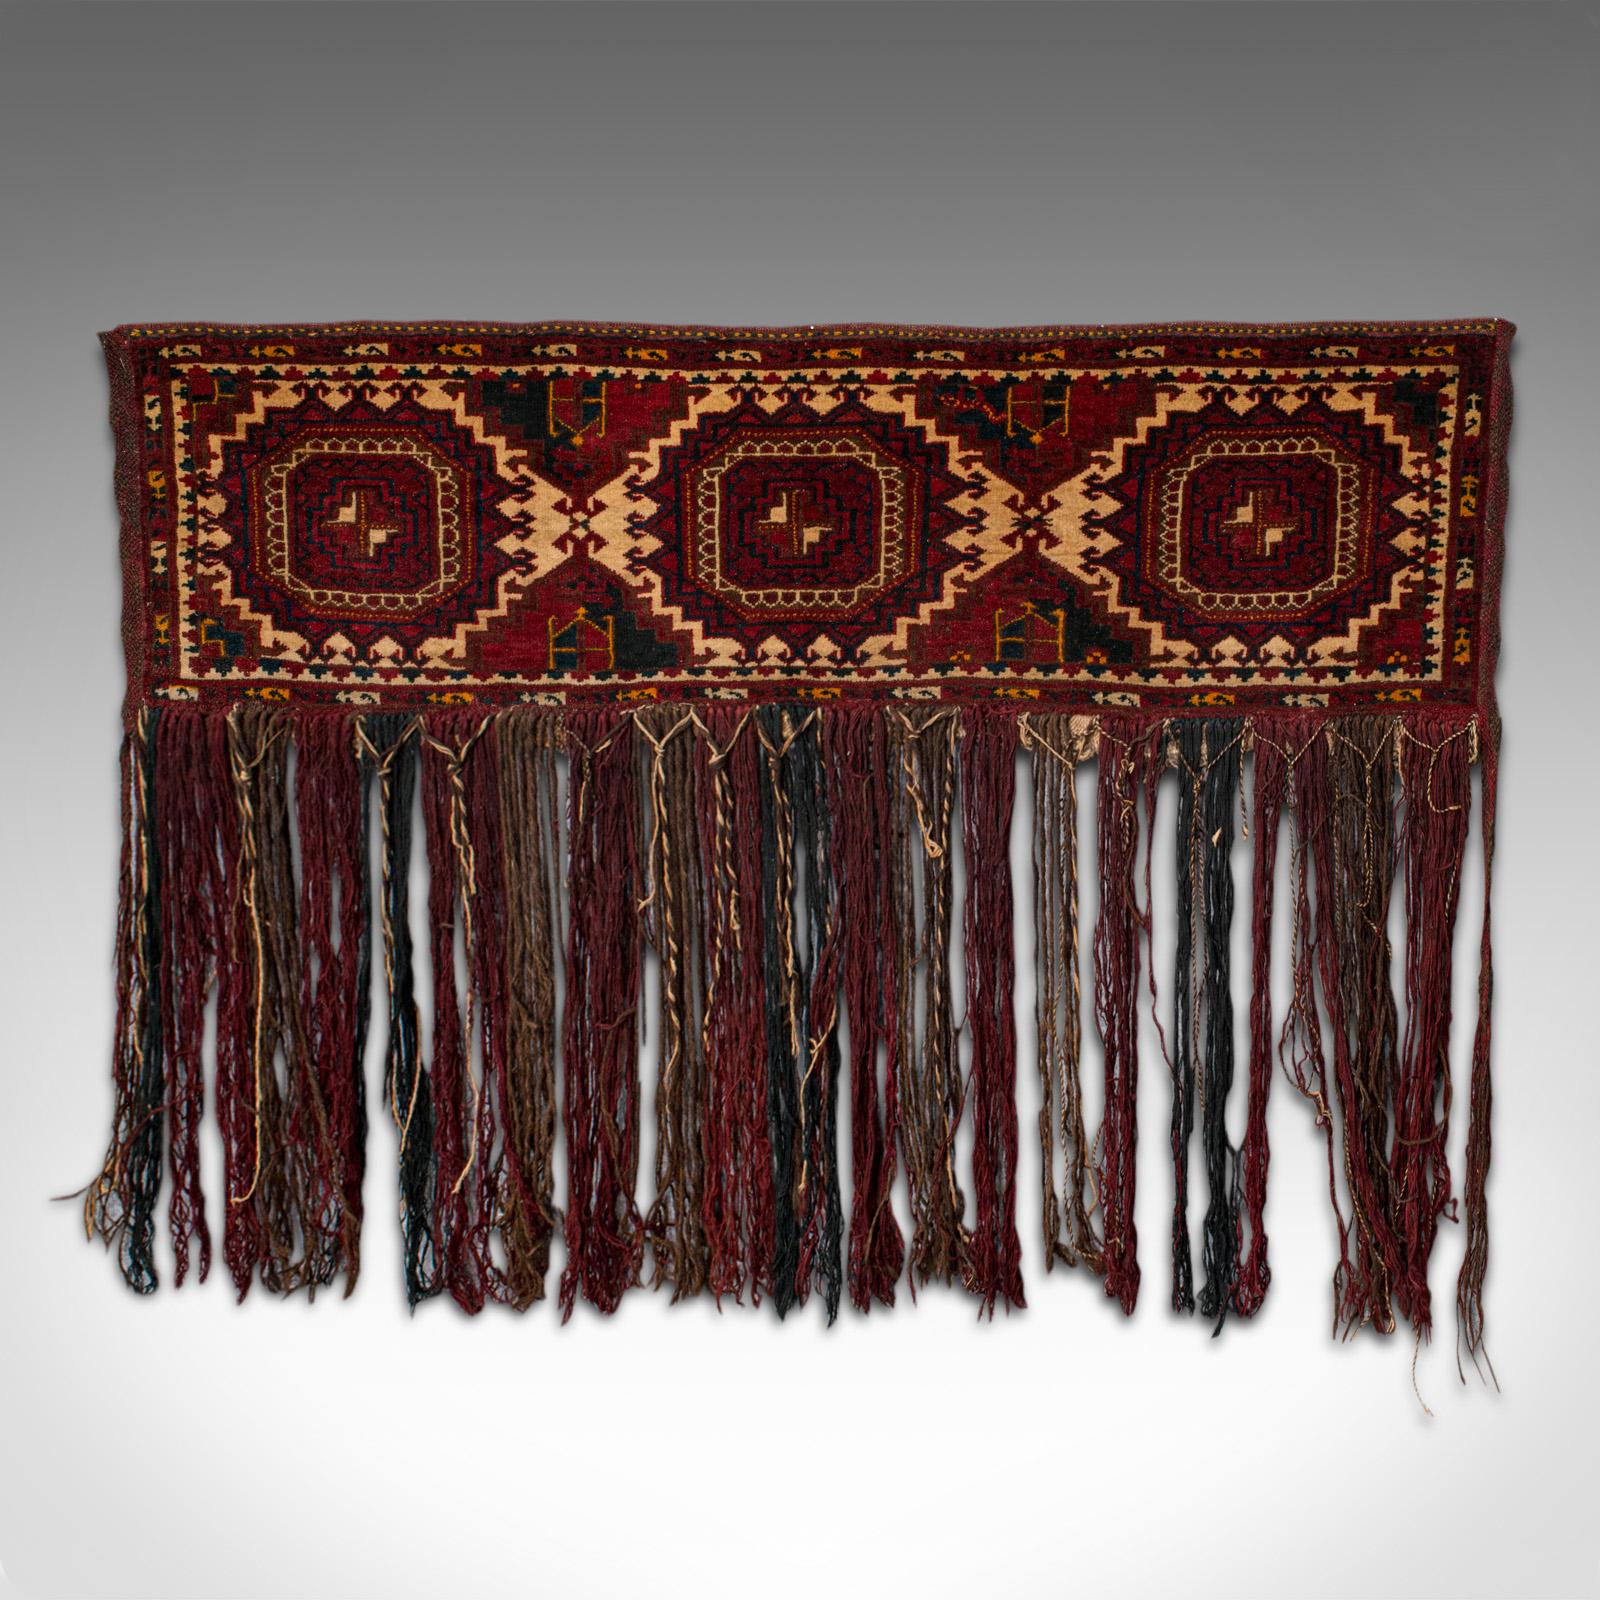 This is an antique Tekke torba. A Caucasian, woven tent bag or decorative wall covering, dating to the late 19th century, circa 1900.

Superb example of the Torba or nomadic tent bag
Displaying a desirable aged patina, free of fade or